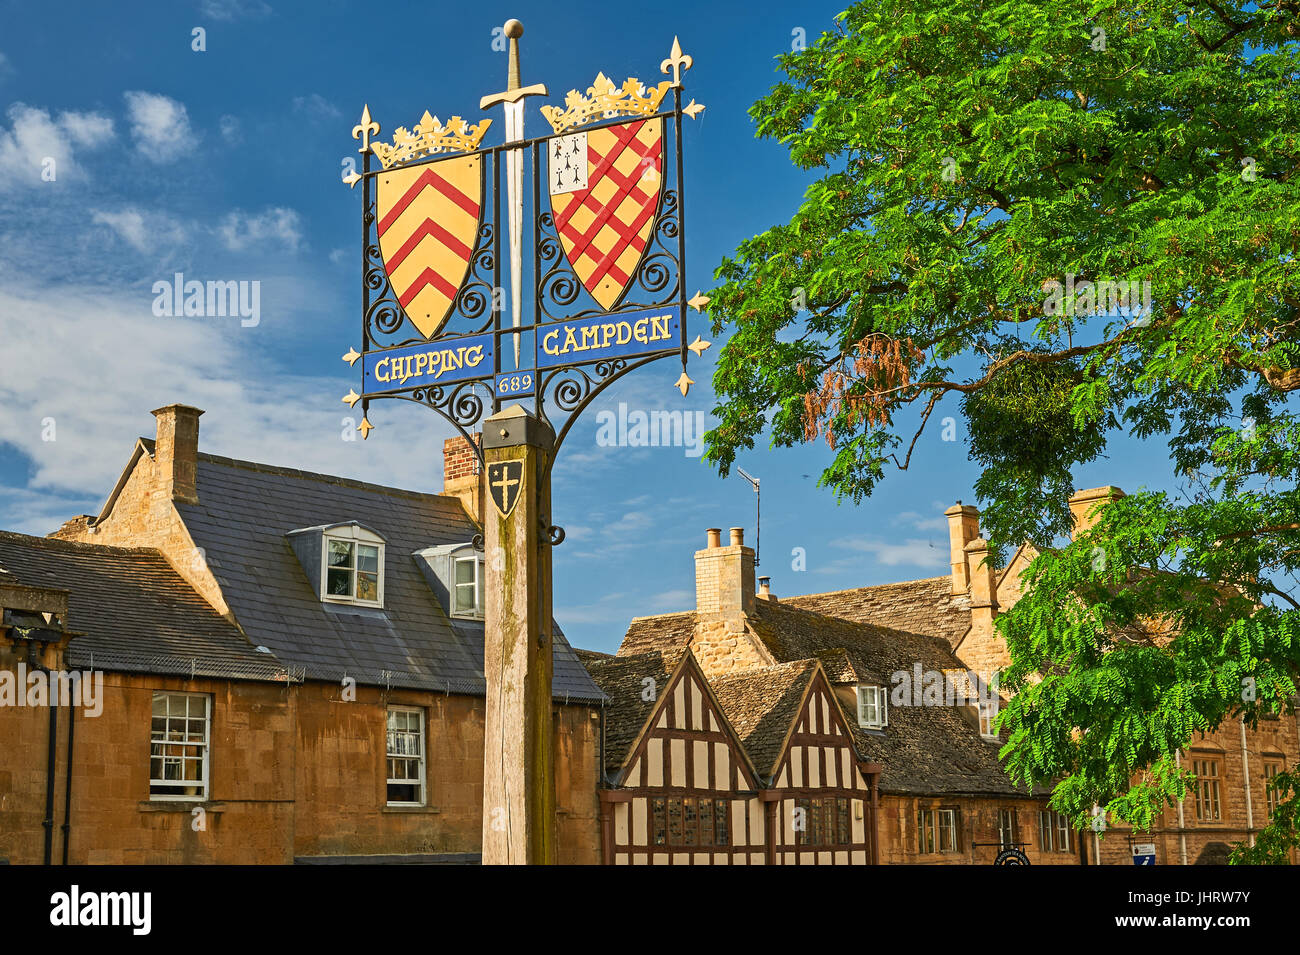 High Street, Chipping Campden with buildings in Cotswold stone Stock Photo